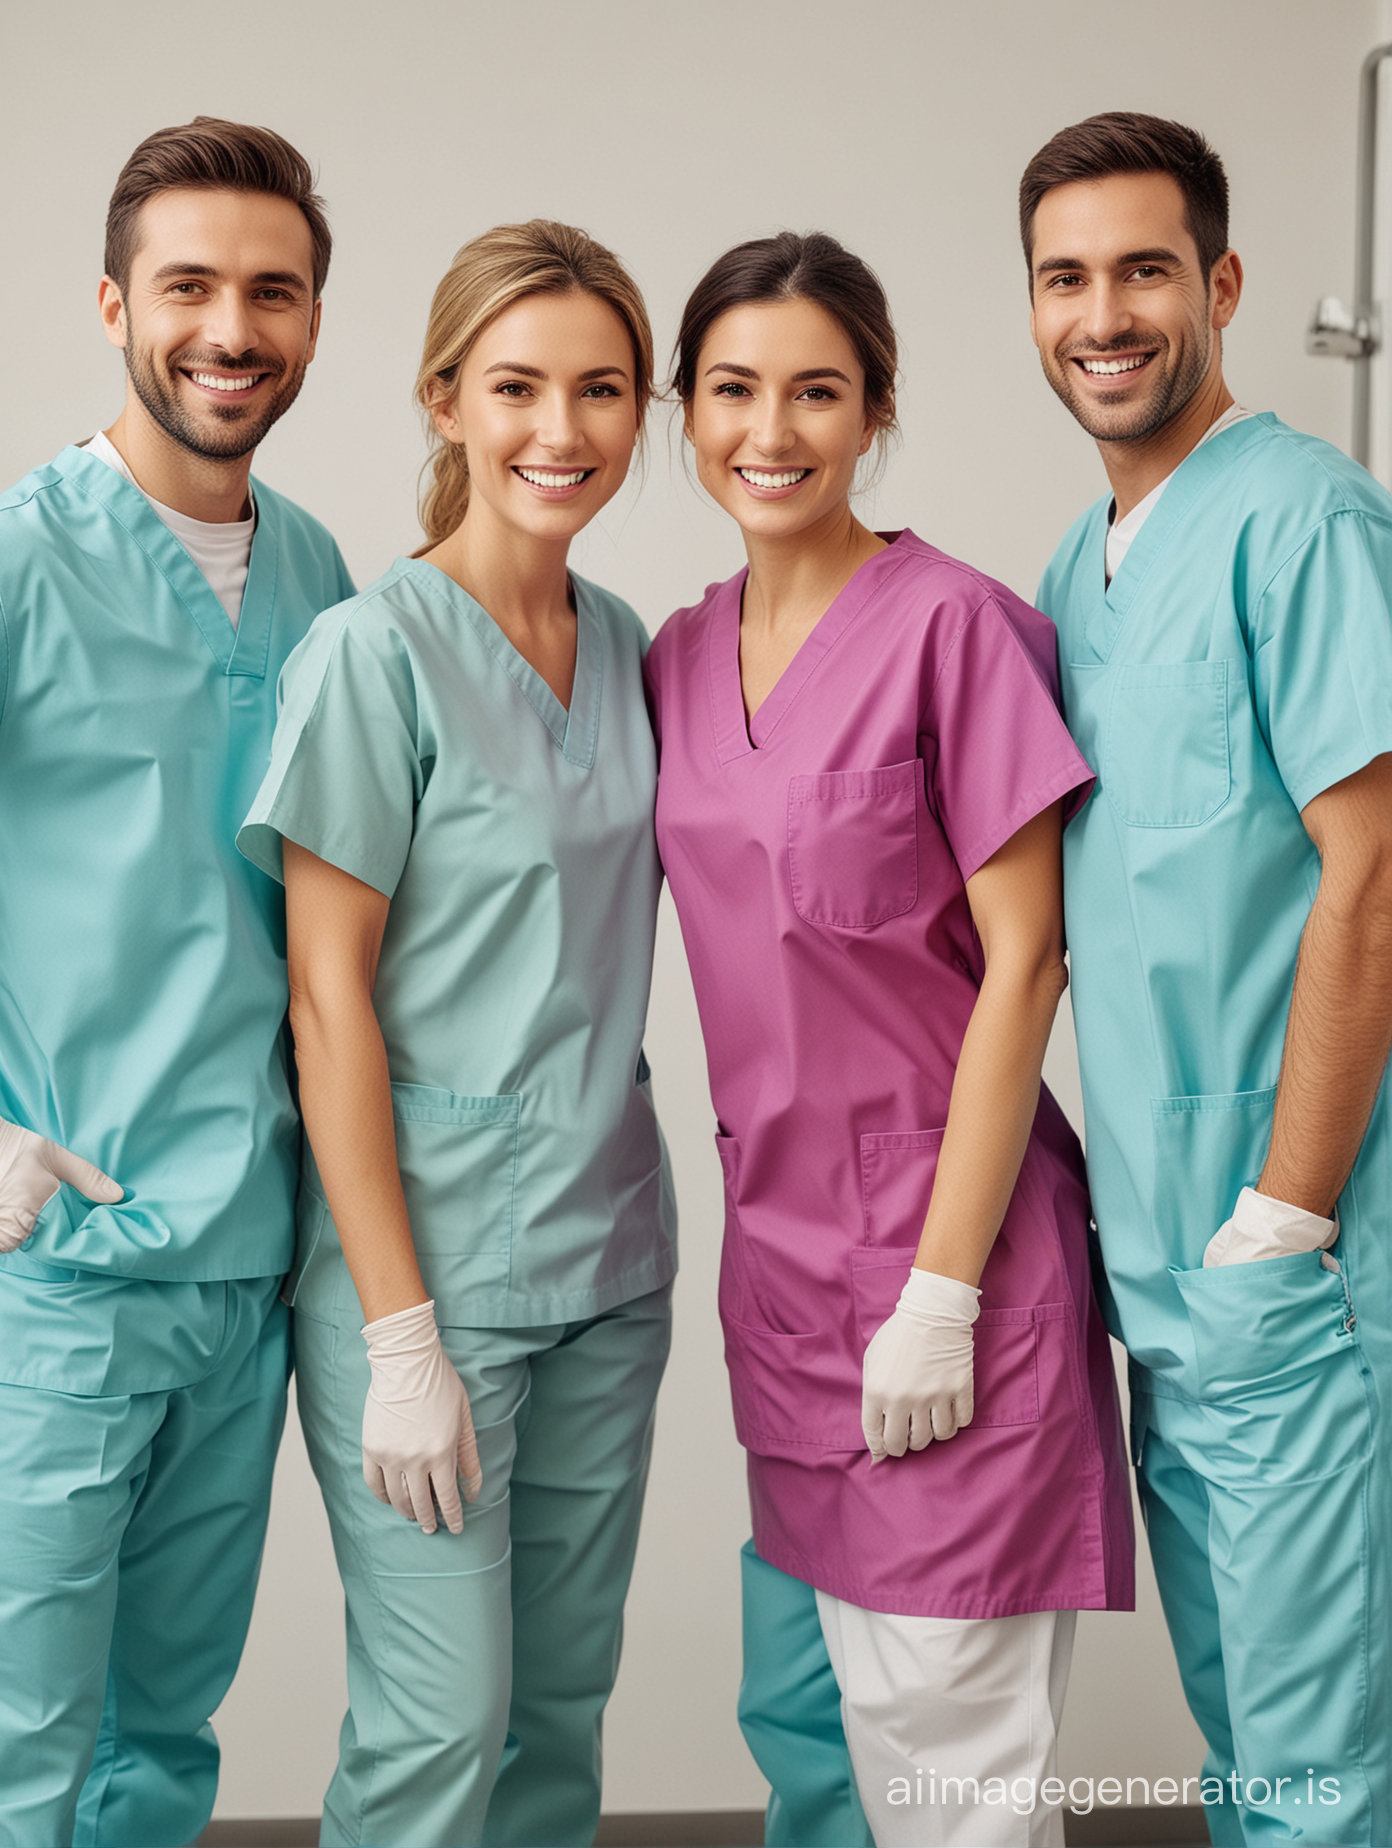 DENTISTRY TEAM DOCTORS AND NURSES. 4 PEOPLE smiling. THEY ARE standing. They have Diferrent color outfits
